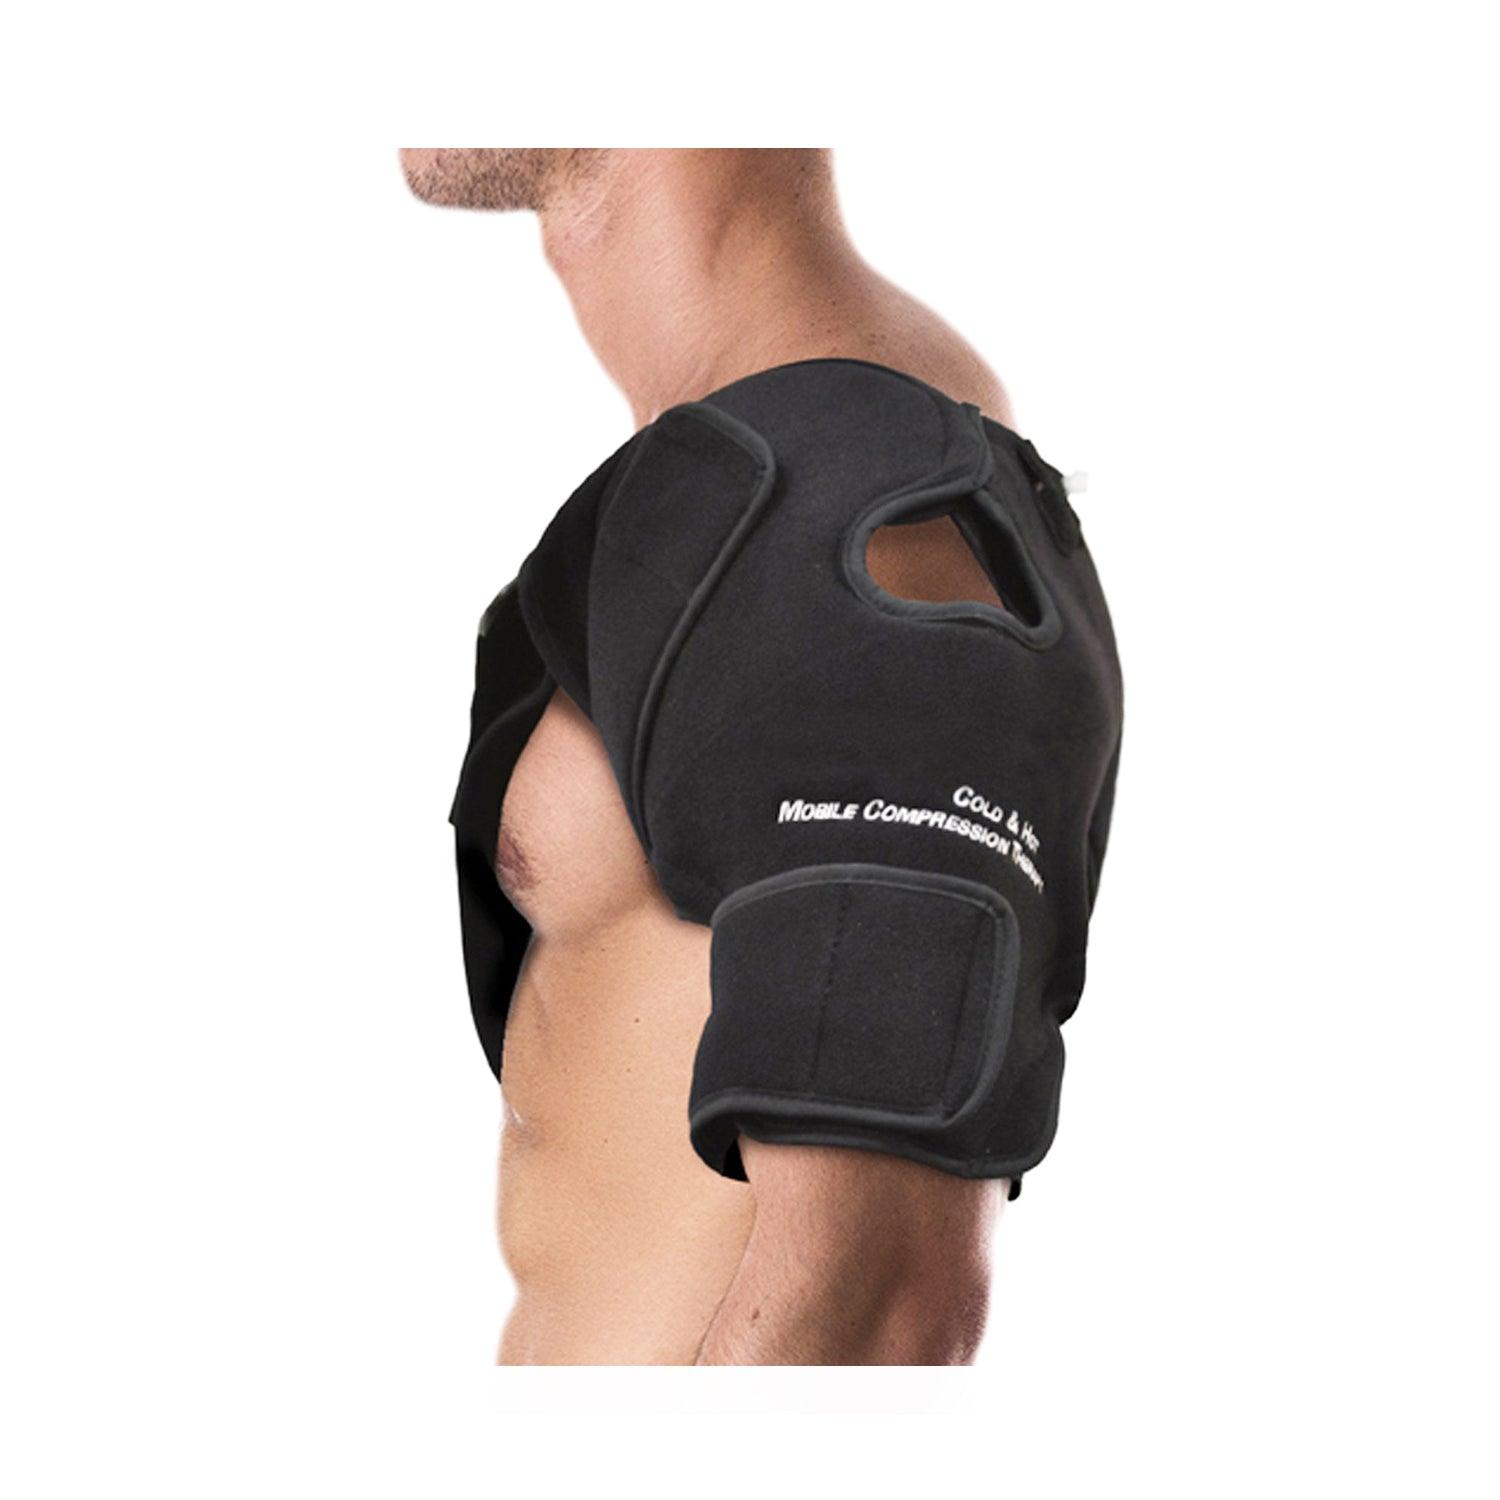 Sluffs Shoulder Support with Pressure Pad Rotor Cuff Breathable